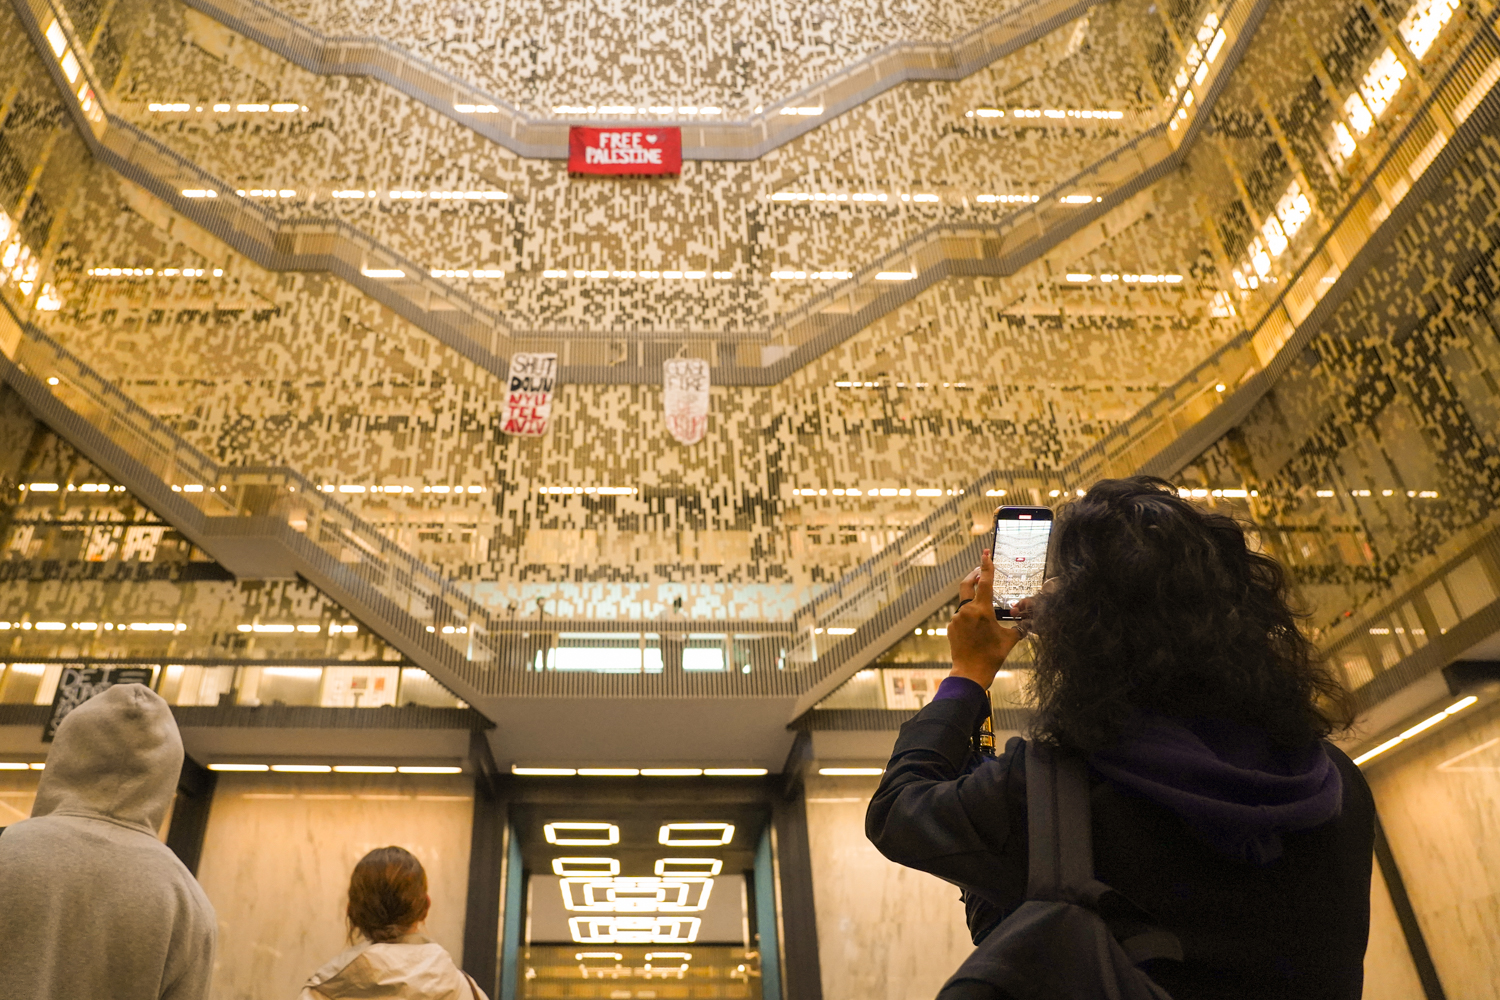 A woman with black hair wearing a black jacket takes photos of banners hanging from the staircases of the Bobst Library.